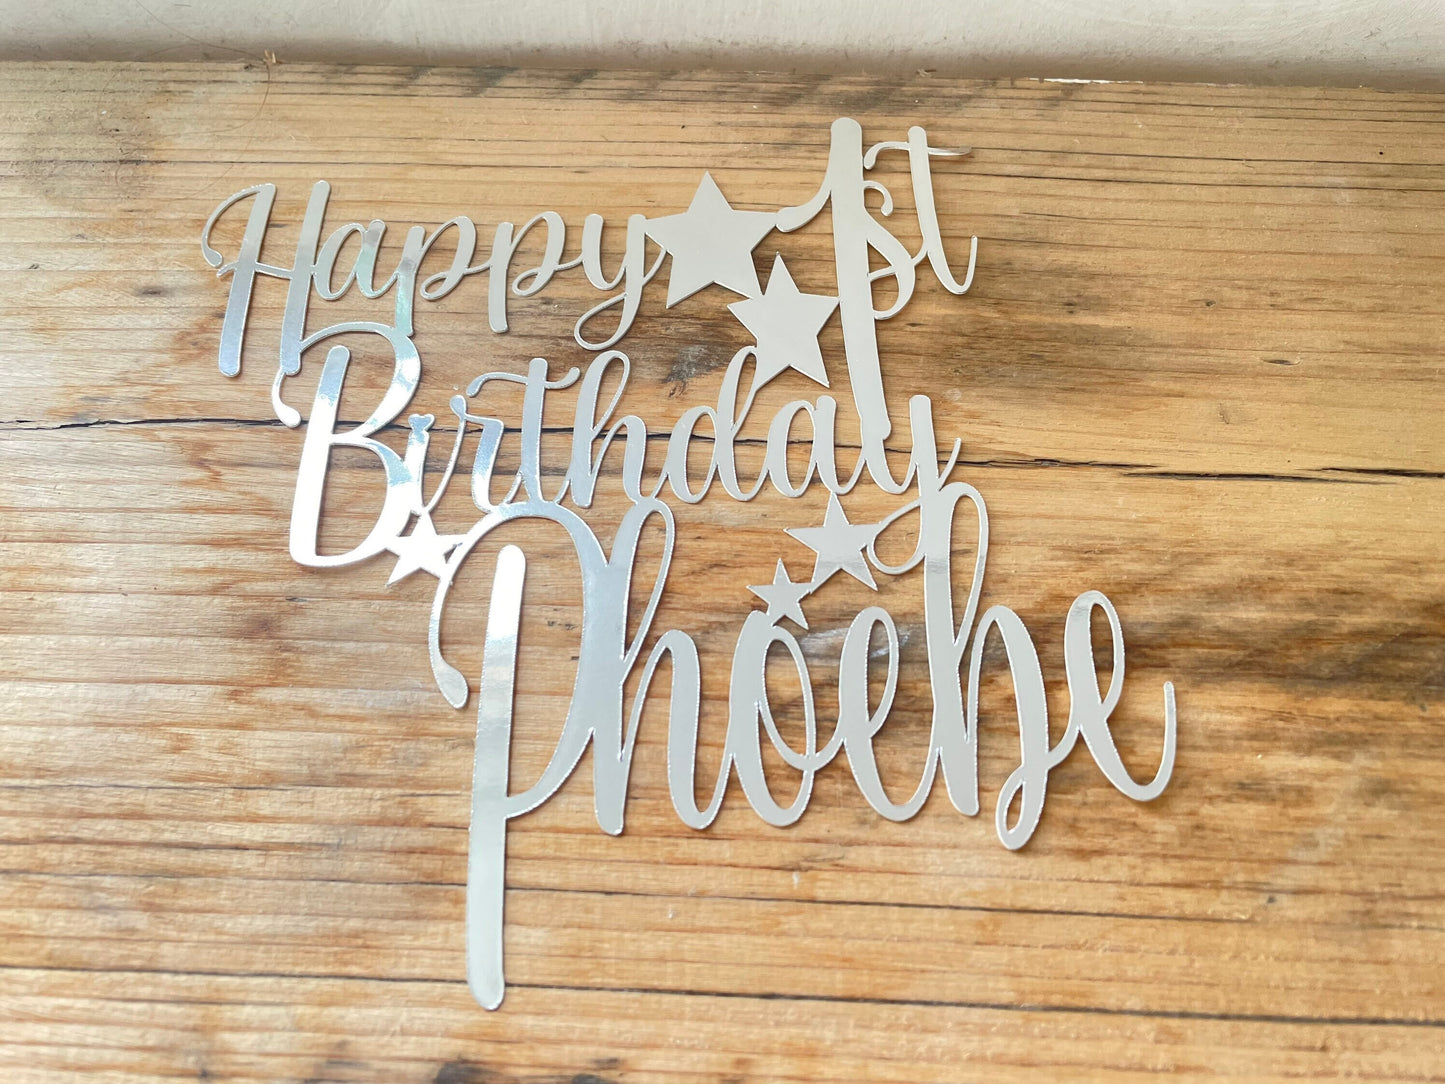 Personalised 1st Birthday Cake Topper, Name and Age Silver Mirror Large Celebration Cake Decor with Stars, First Birthday Party Cake Topper